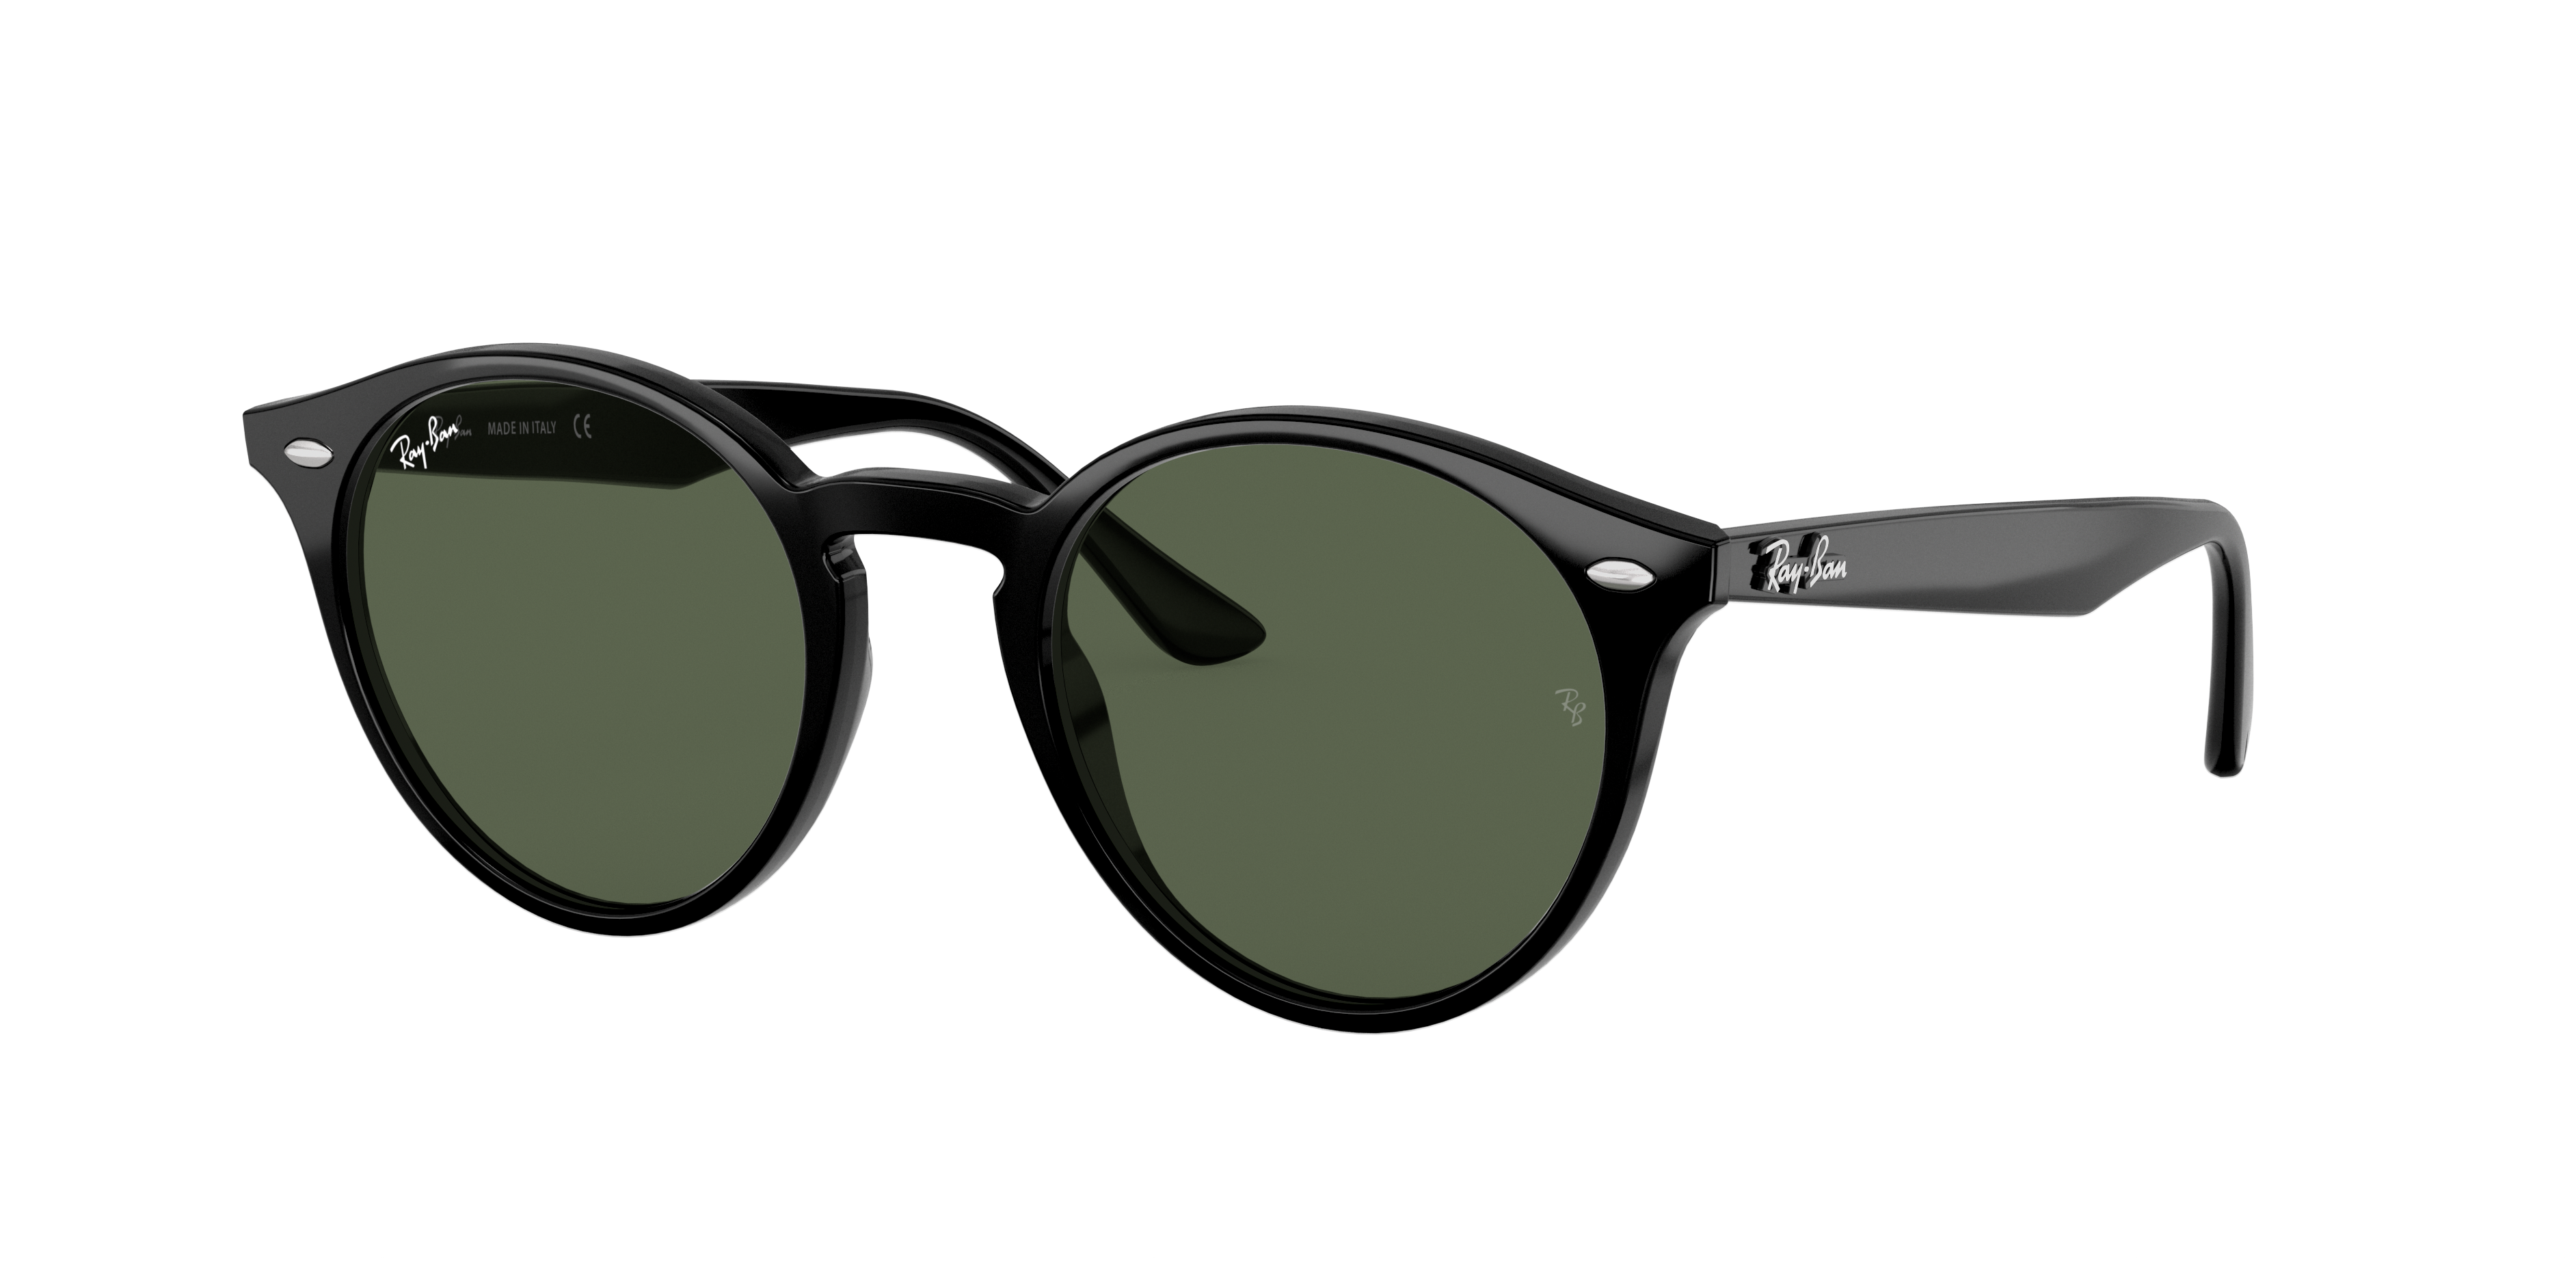 Ray-Ban 0RB2180 in Black Sunglasses | OPSM